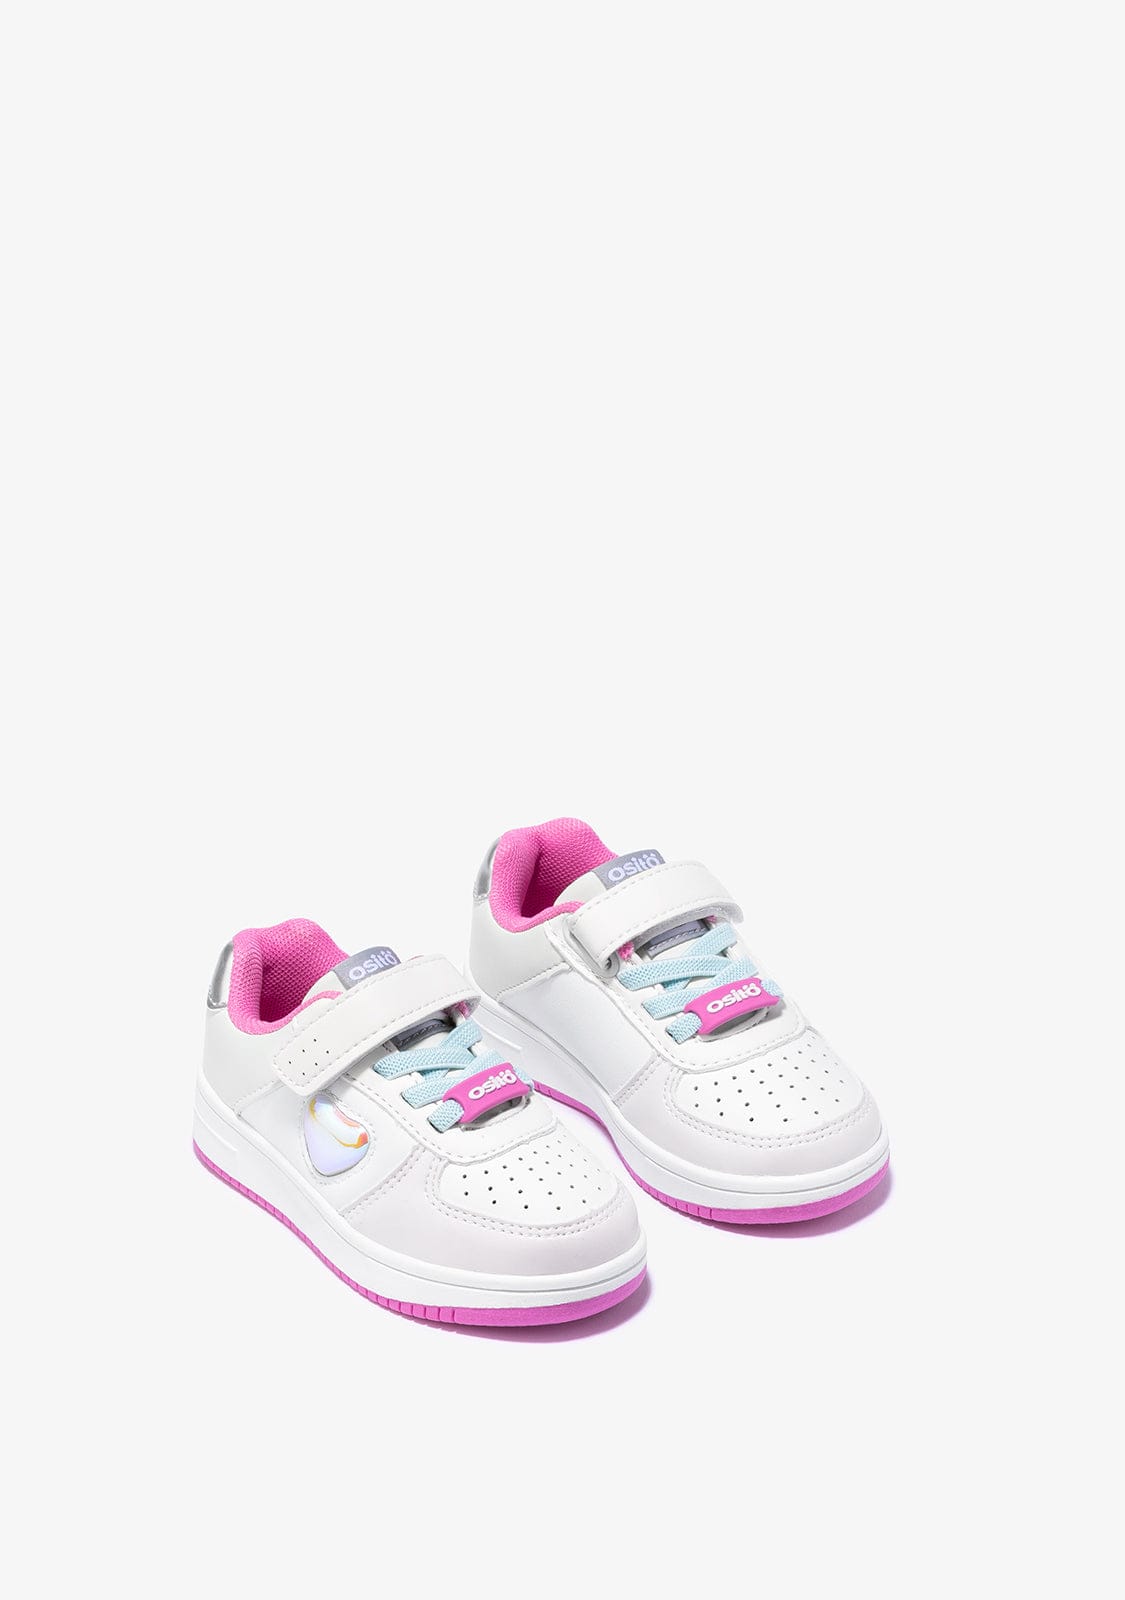 OSITO Shoes Baby's White Solar With Lights Sneakers